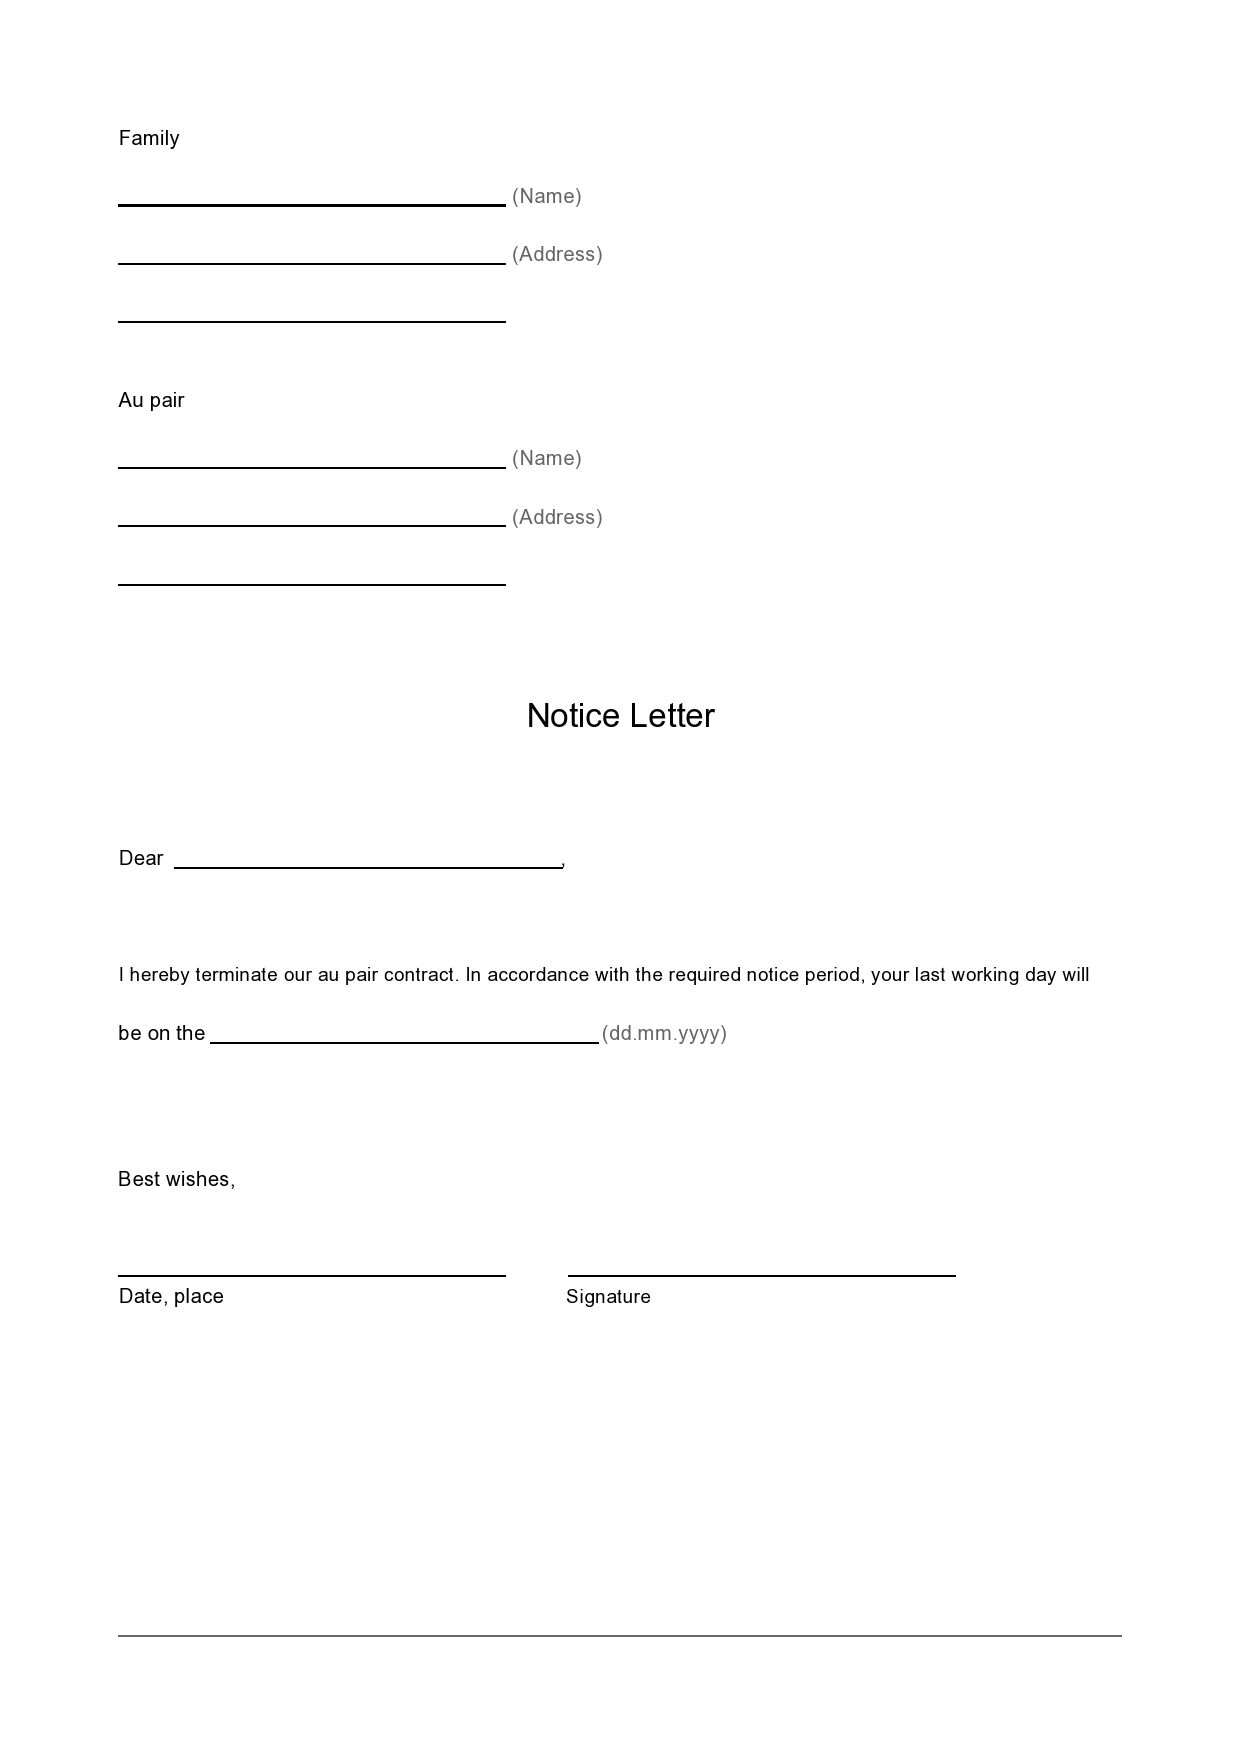 Free contract termination letter 09